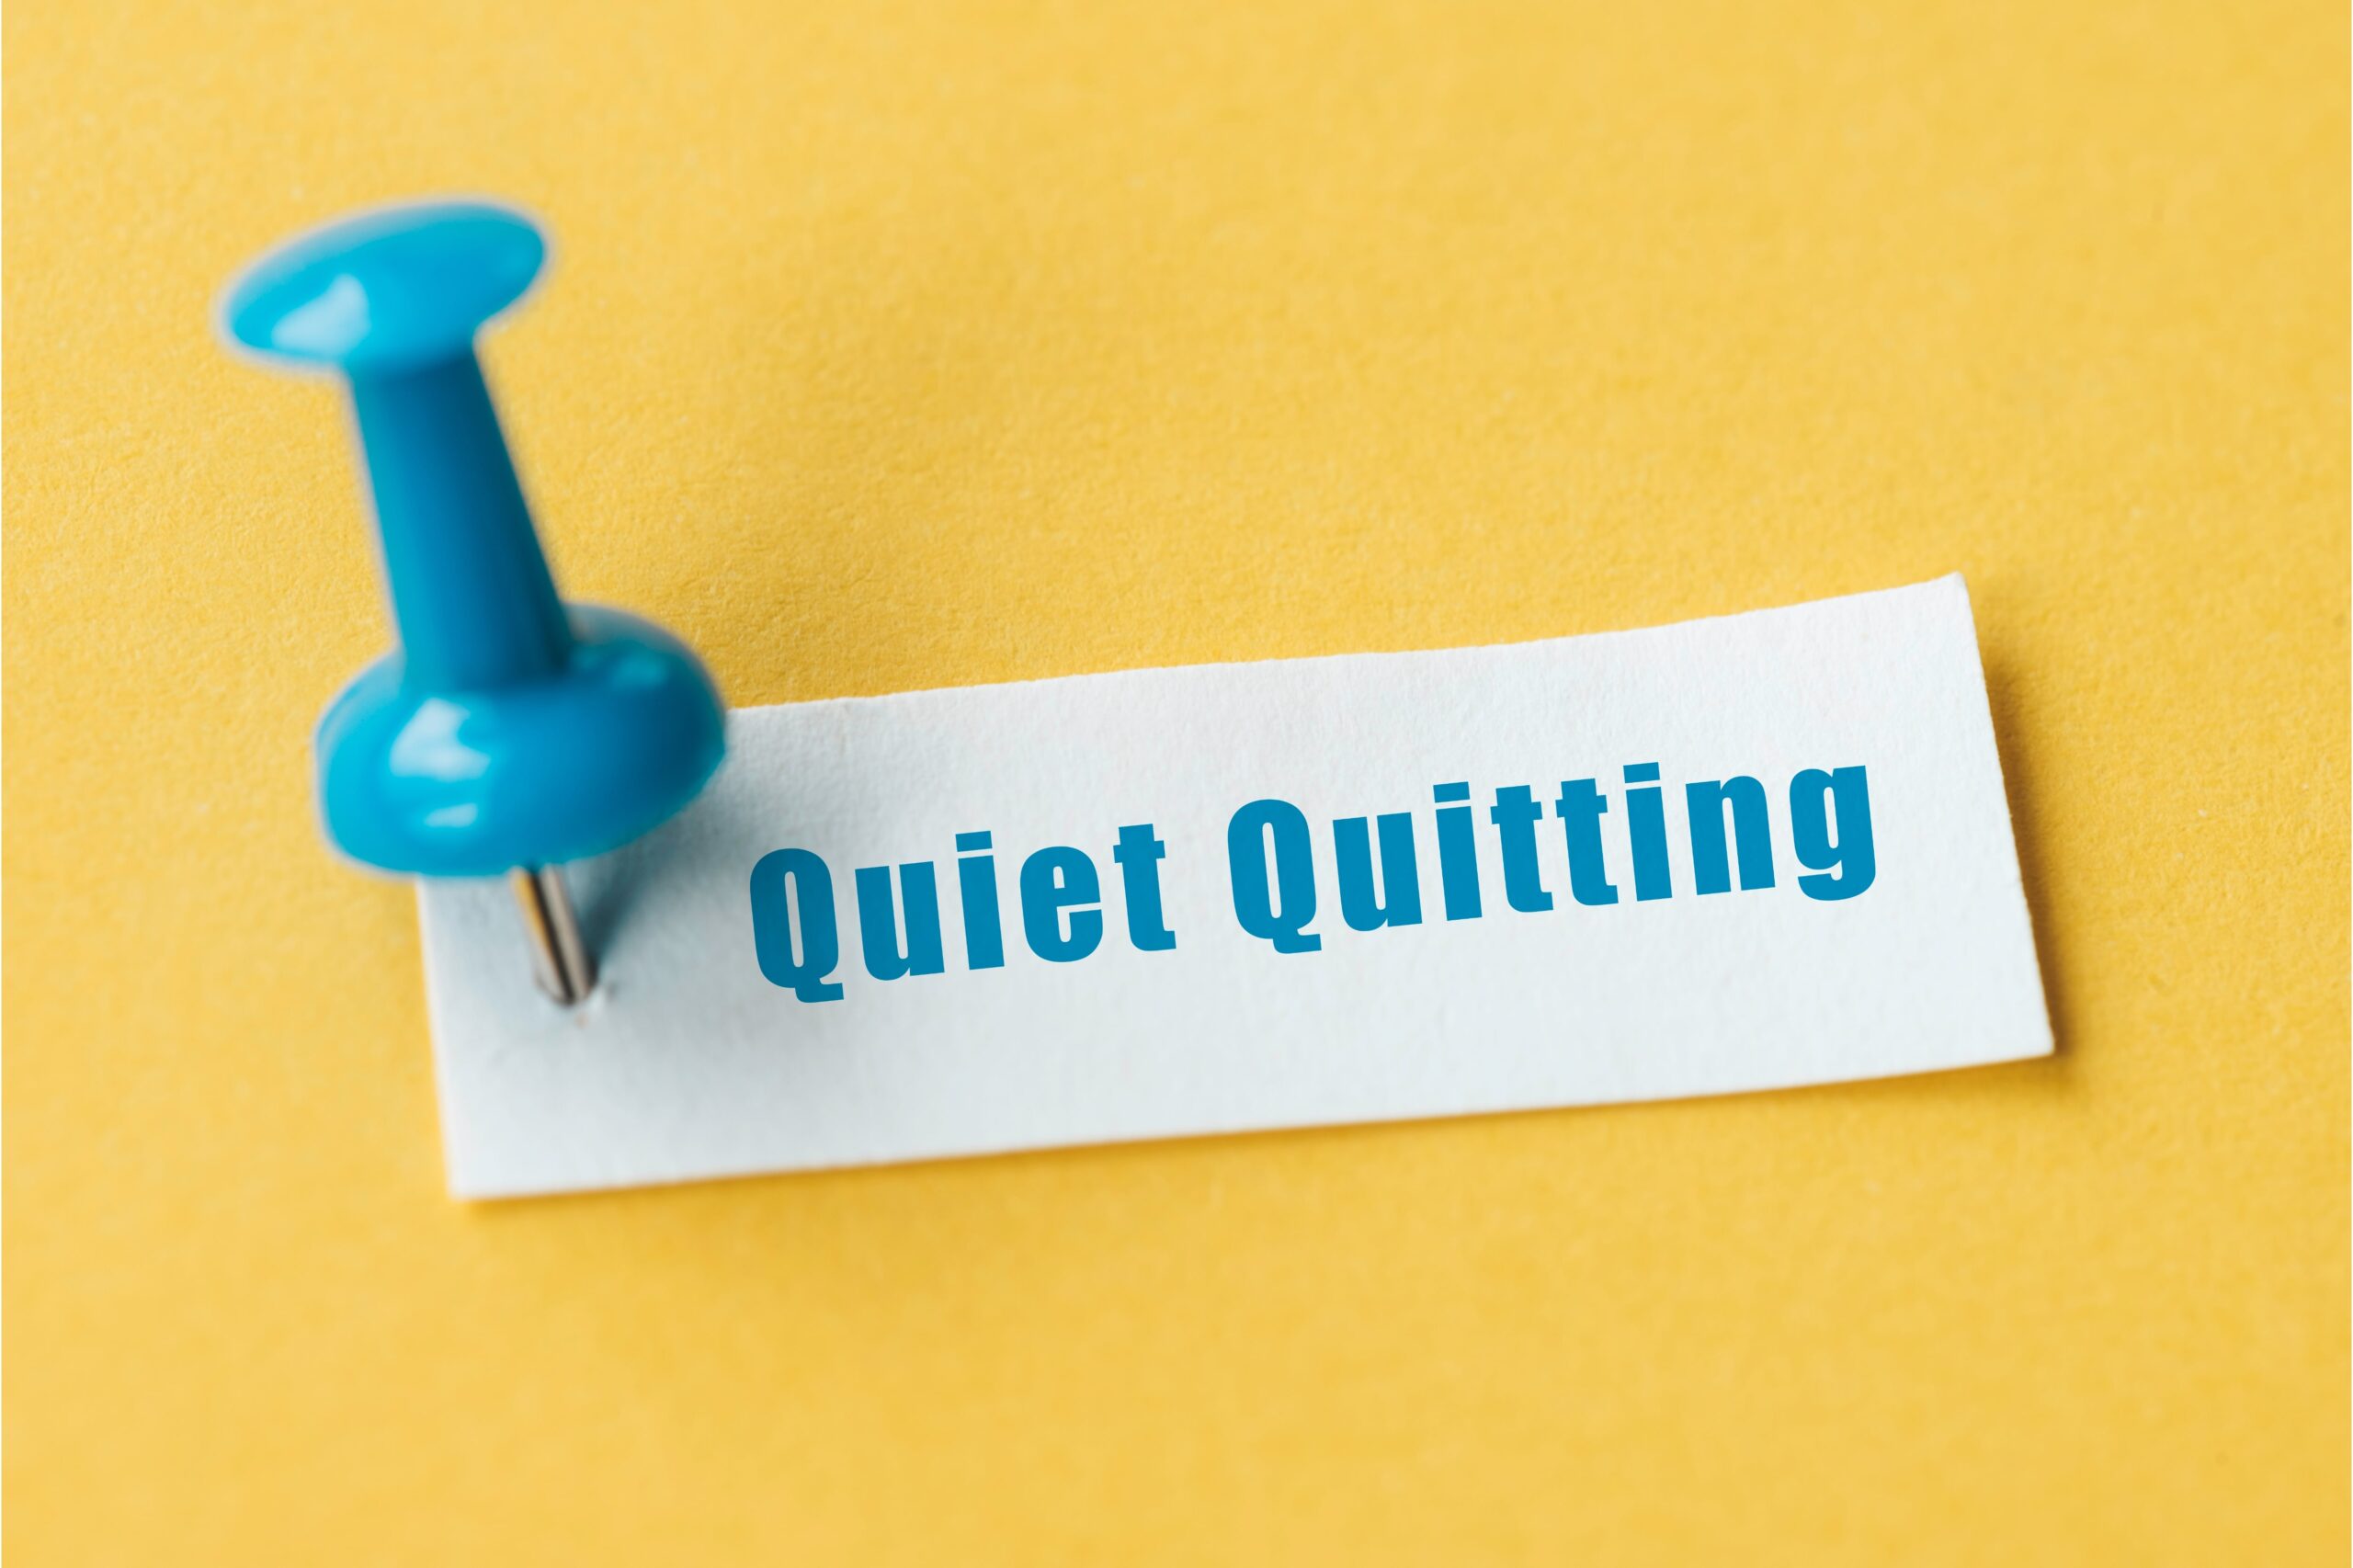 the words quiet quitting on a yellow noticeboard